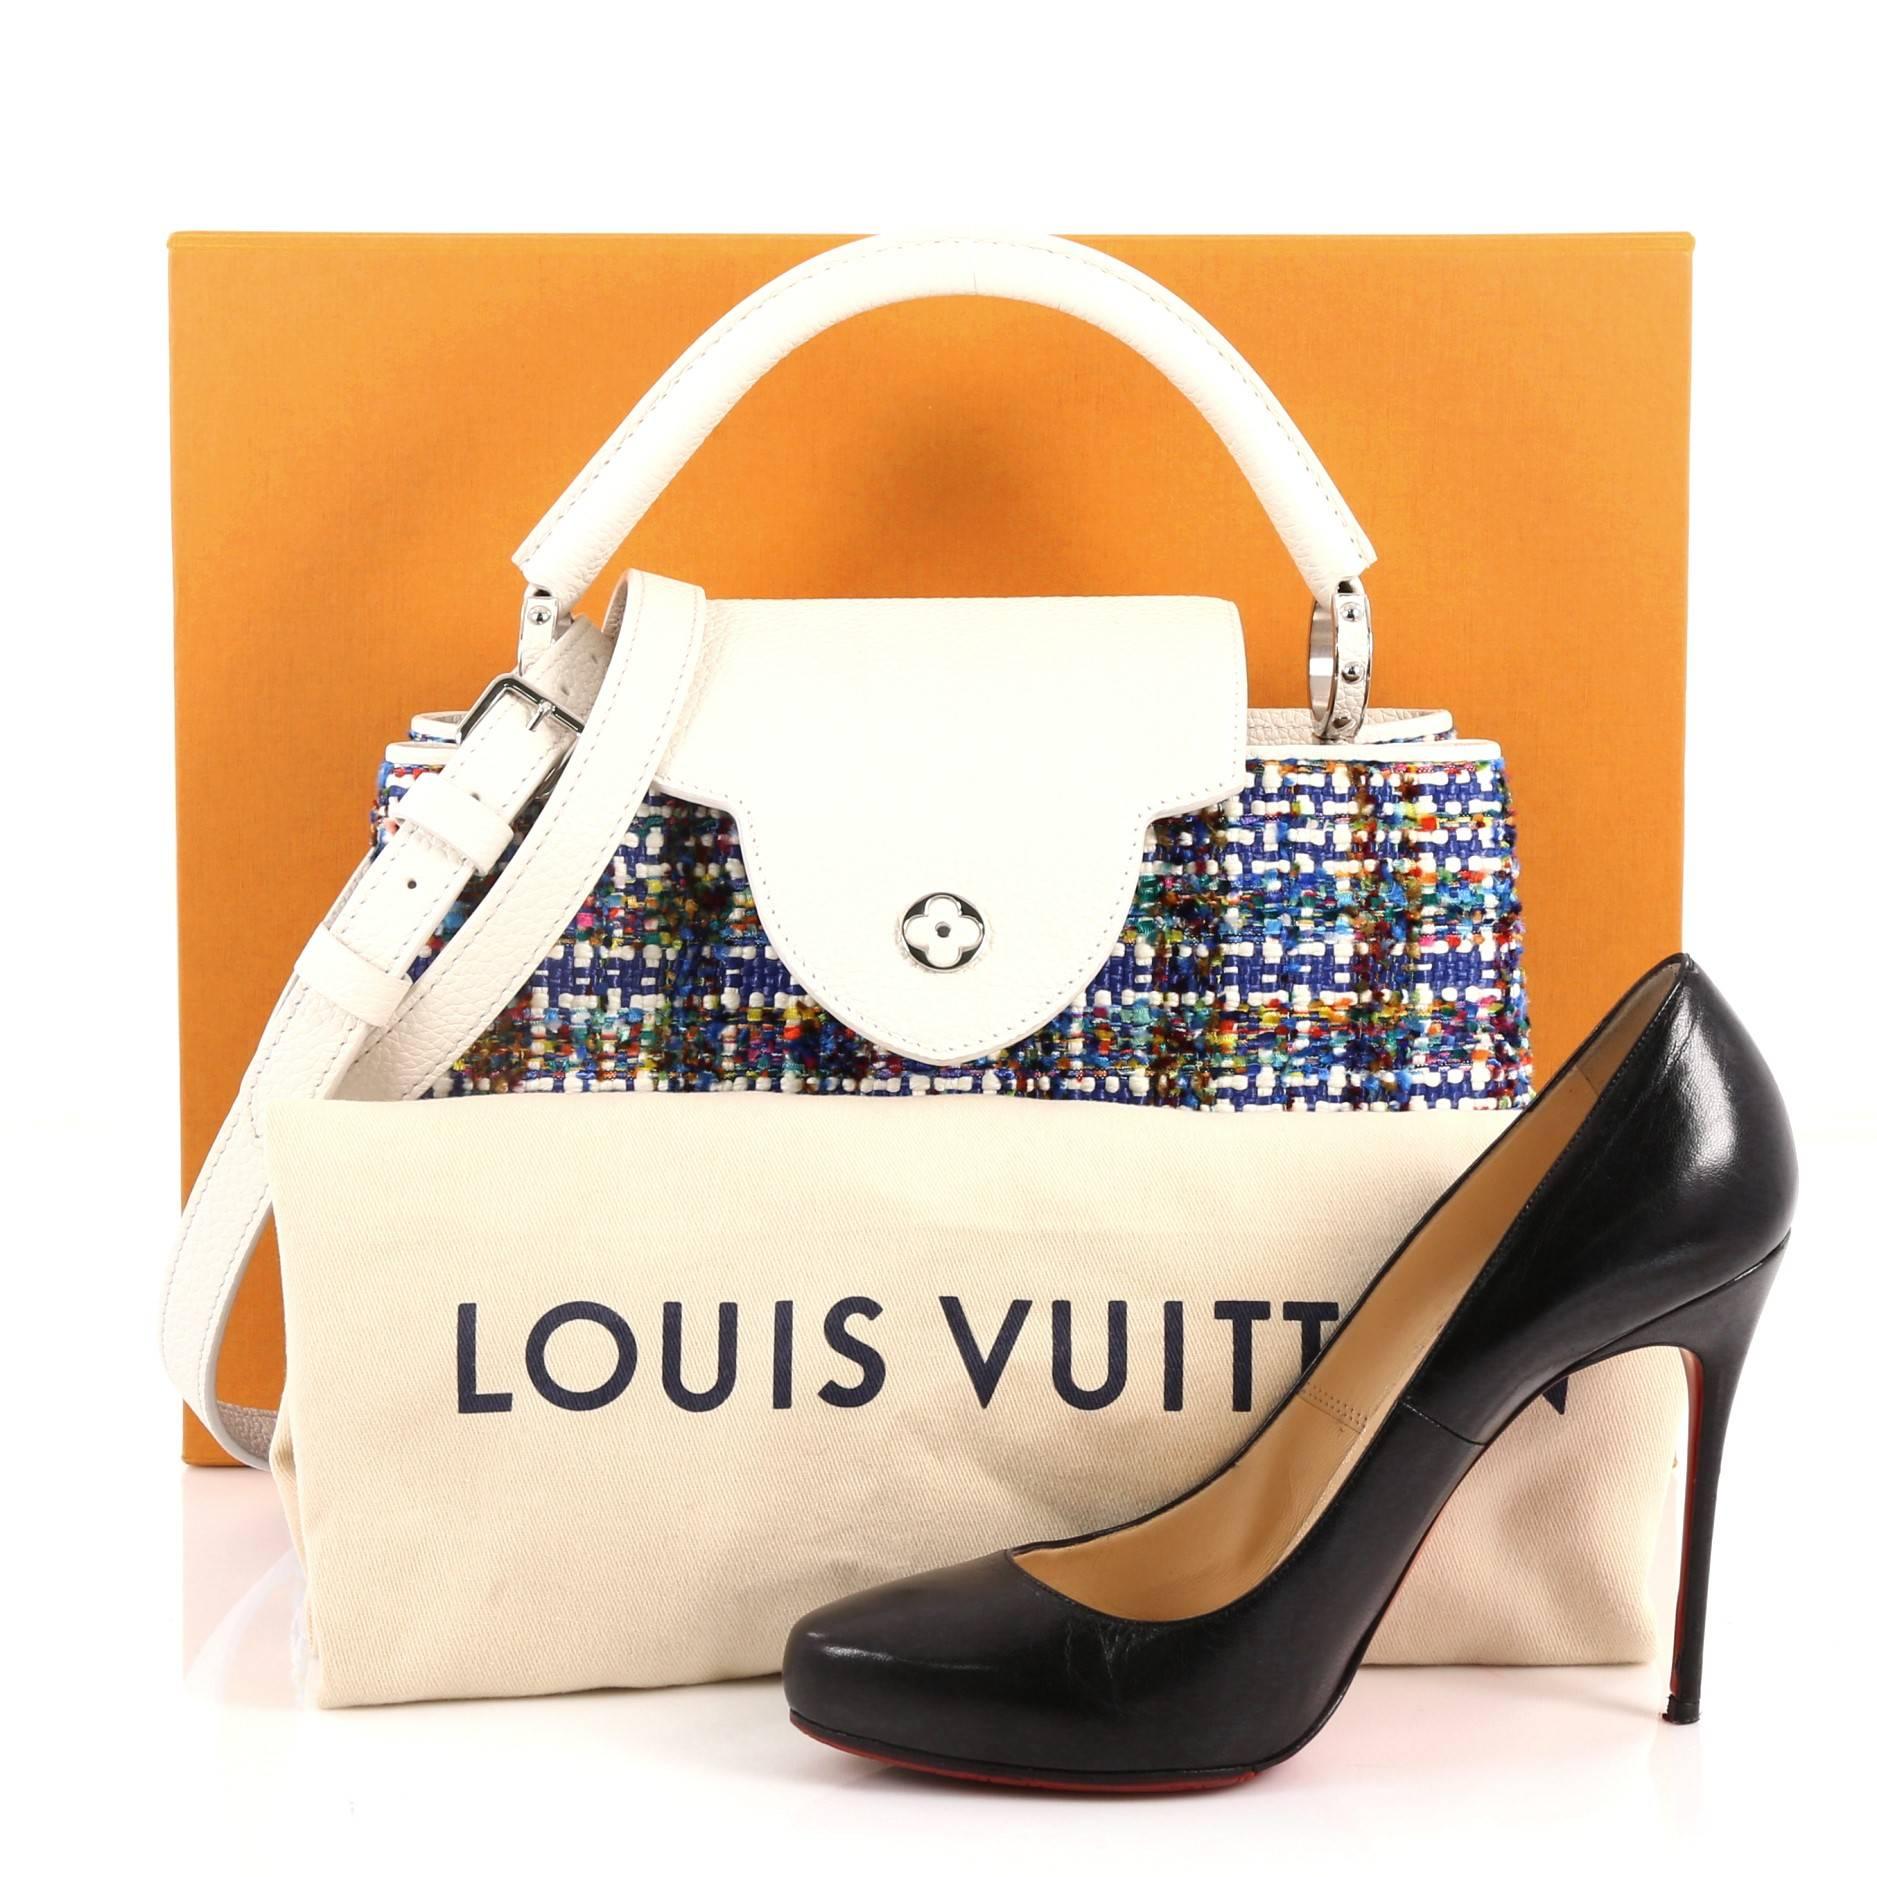 This authentic Louis Vuitton Capucines Handbag Limited Edition Broderies PM is sophisticated and ladylike luxurious bag inspired by the brands' Parisian heritage. Crafted from blue tweed broderies, this chic stand-out bag features a single loop